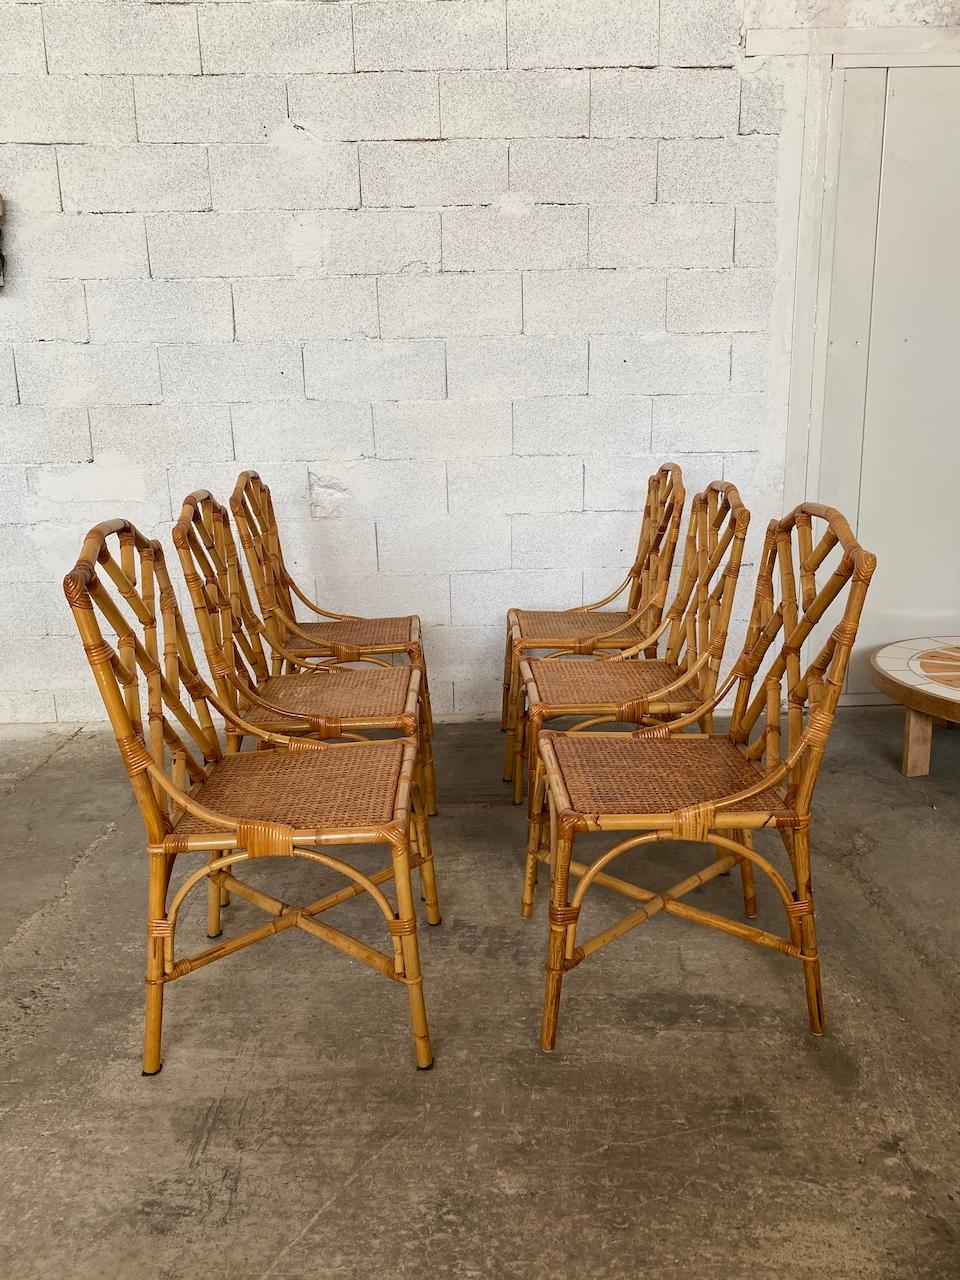 Folding table set and 4 dal vera chairs in bamboo and braided wicker 1970. Very good condition. Possibility of 6 chairs. Dimensions closed table: 90 X 90 cm / open table 180 X 90 cm. Dimensions chairs: top. 94 larg. 52 cm prof. 55 cm.